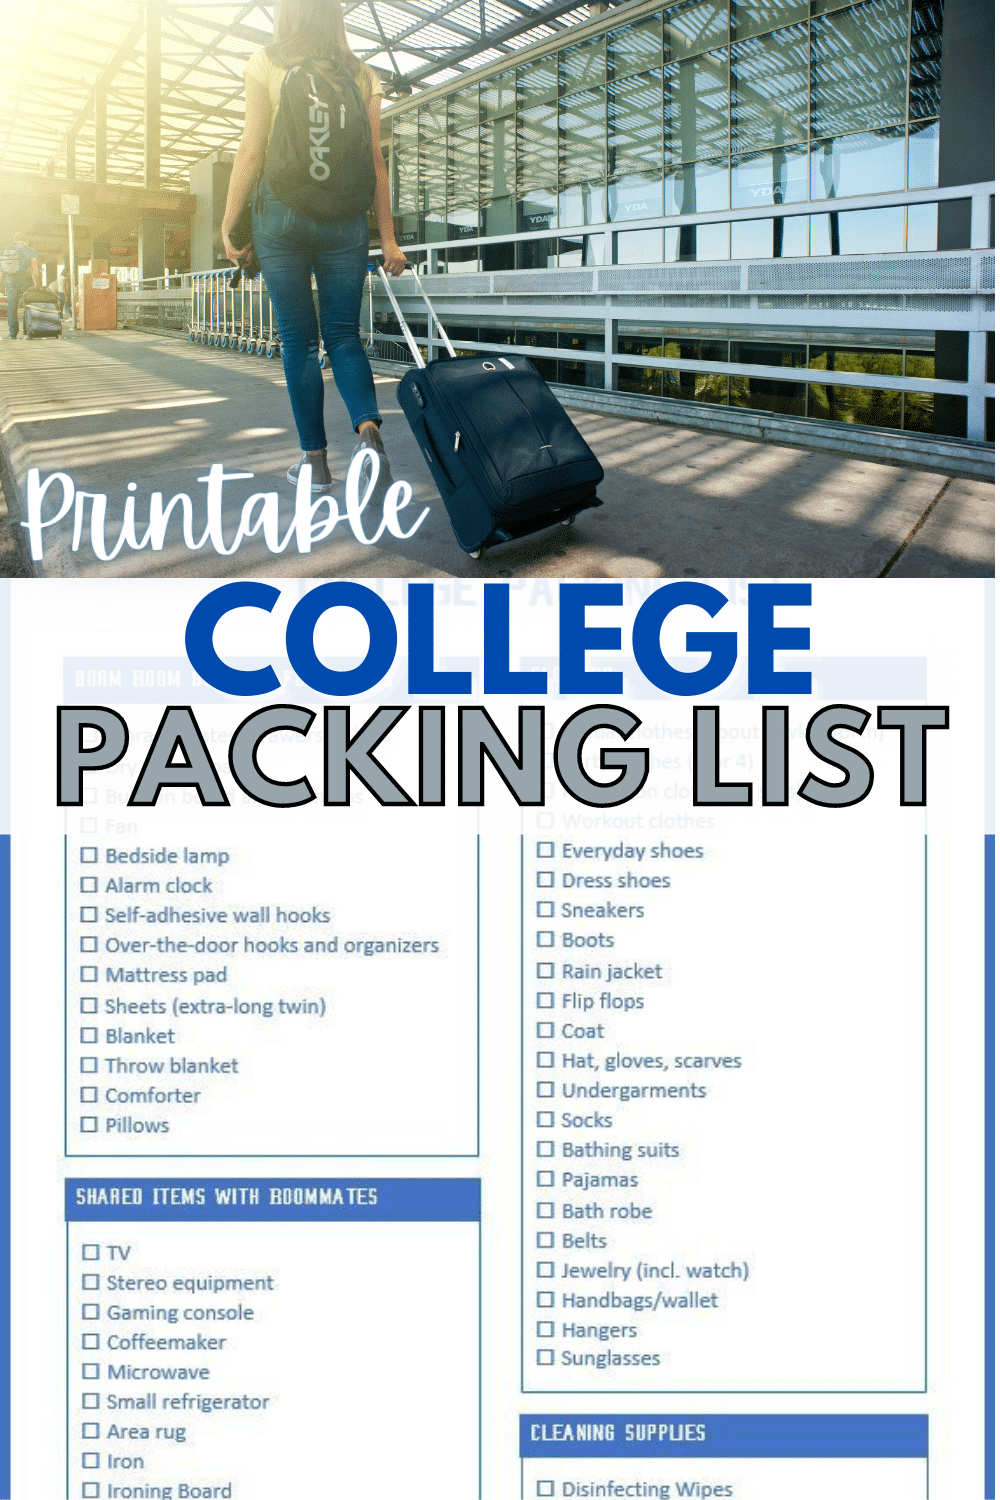 If you have a child going off to college, you'll need to know what to pack. Here's a 2-page college packing list for first-year students moving into a dorm. #collegestudent #collegepackinglist #college #printable via @wondermomwannab